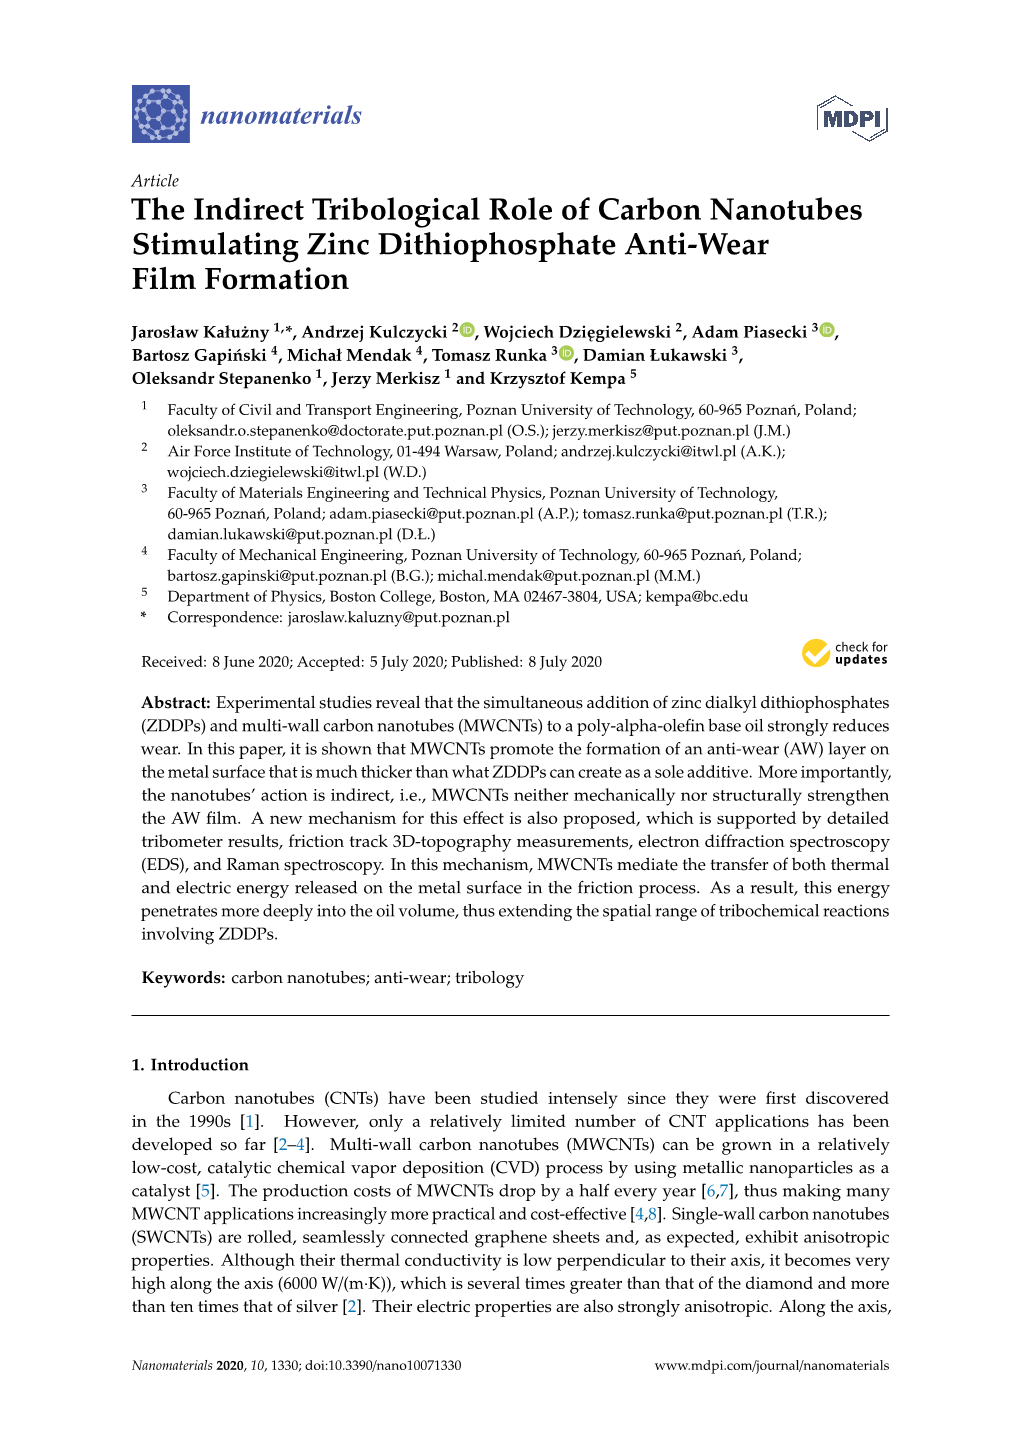 The Indirect Tribological Role of Carbon Nanotubes Stimulating Zinc Dithiophosphate Anti-Wear Film Formation